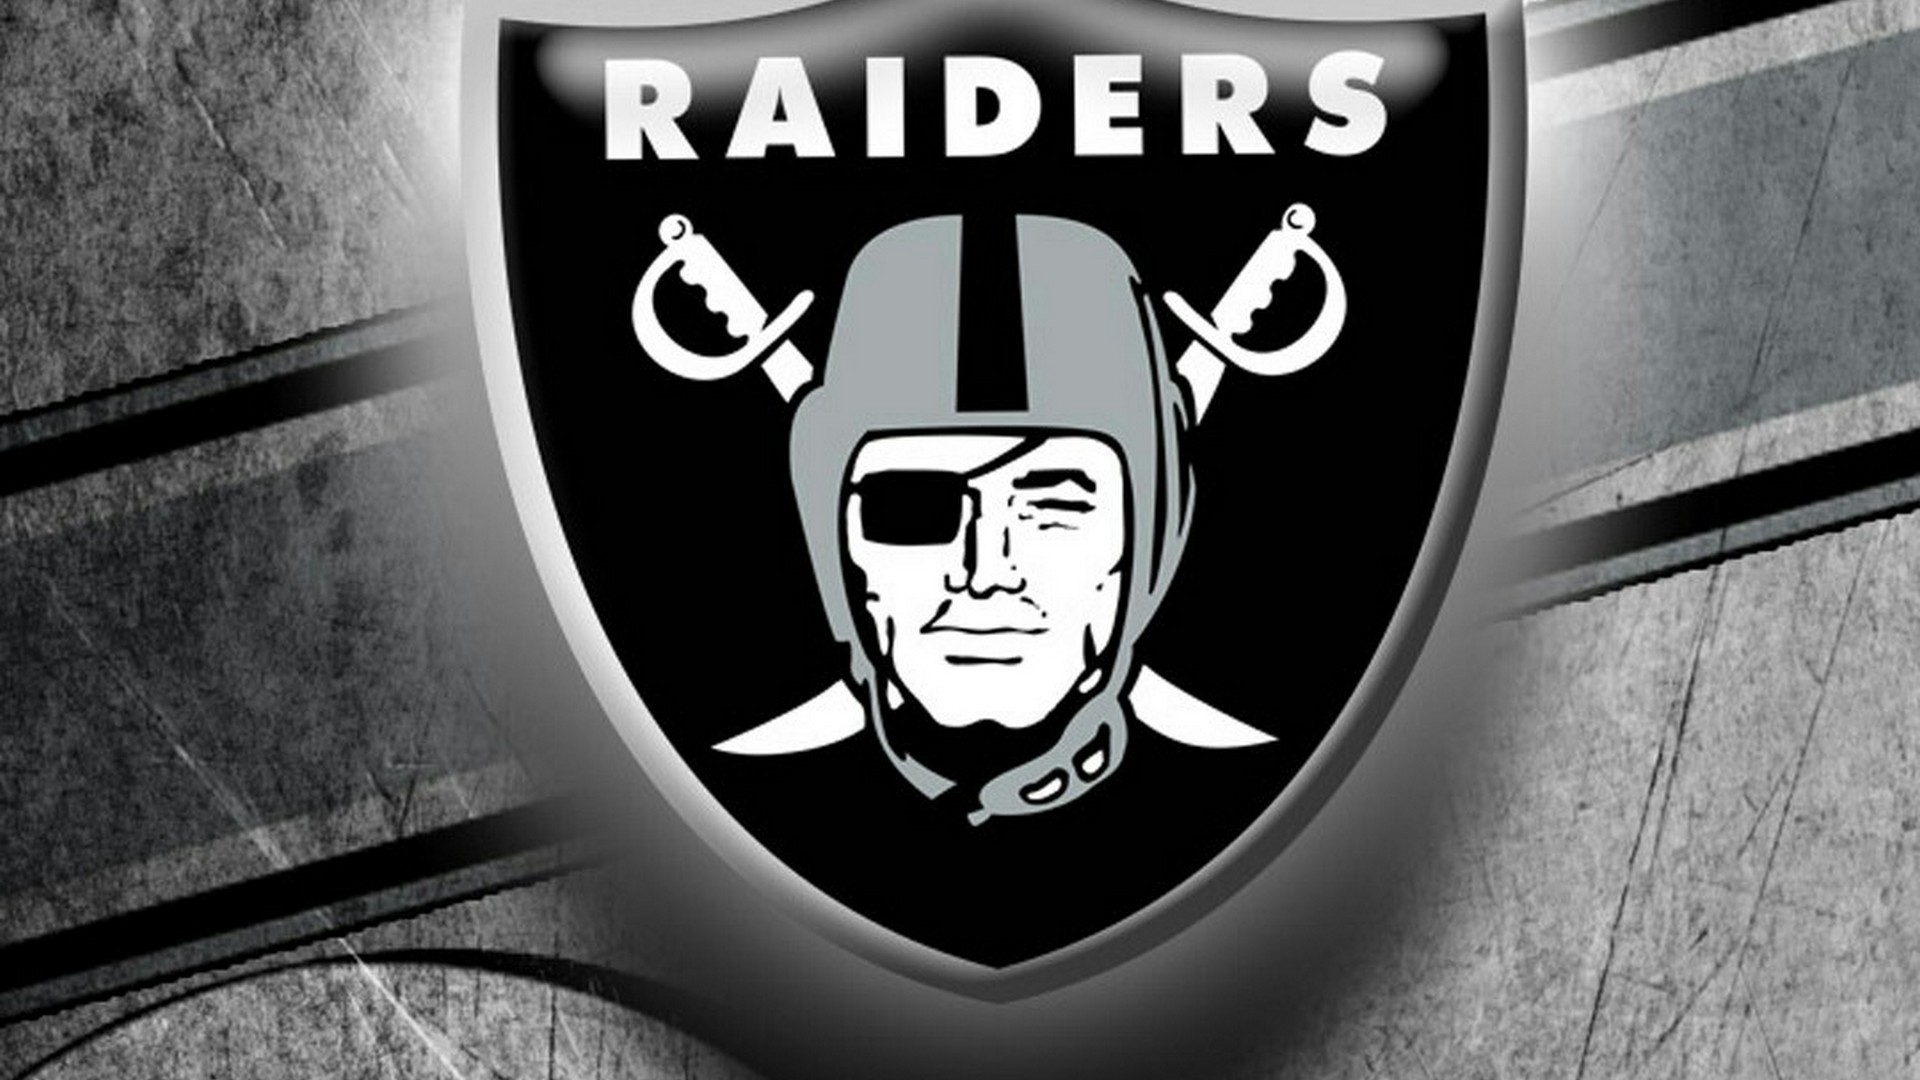 HD Desktop Wallpaper Oakland Raiders NFL With high-resolution 1920X1080 pixel. You can use this wallpaper for your Mac or Windows Desktop Background, iPhone, Android or Tablet and another Smartphone device